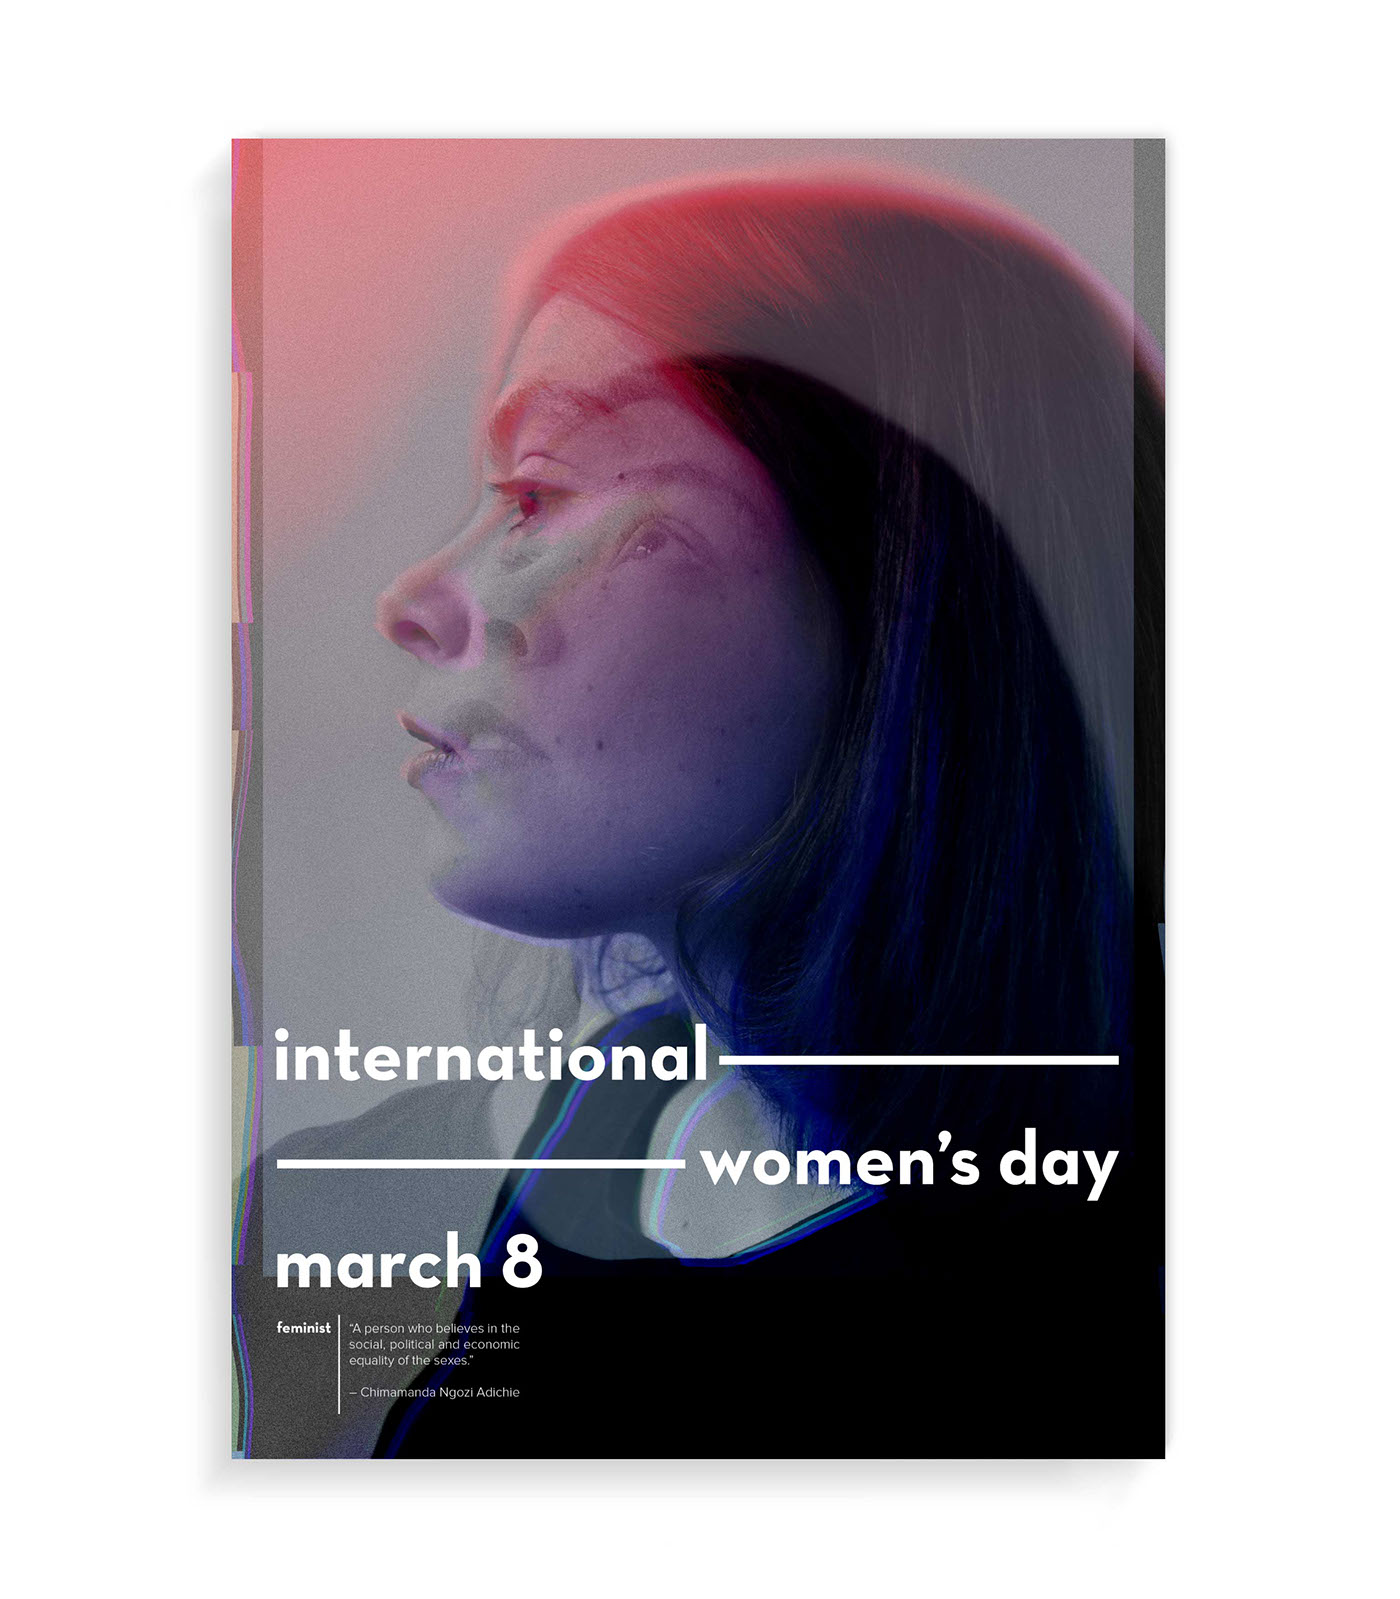 poster women's day type feminism March 8